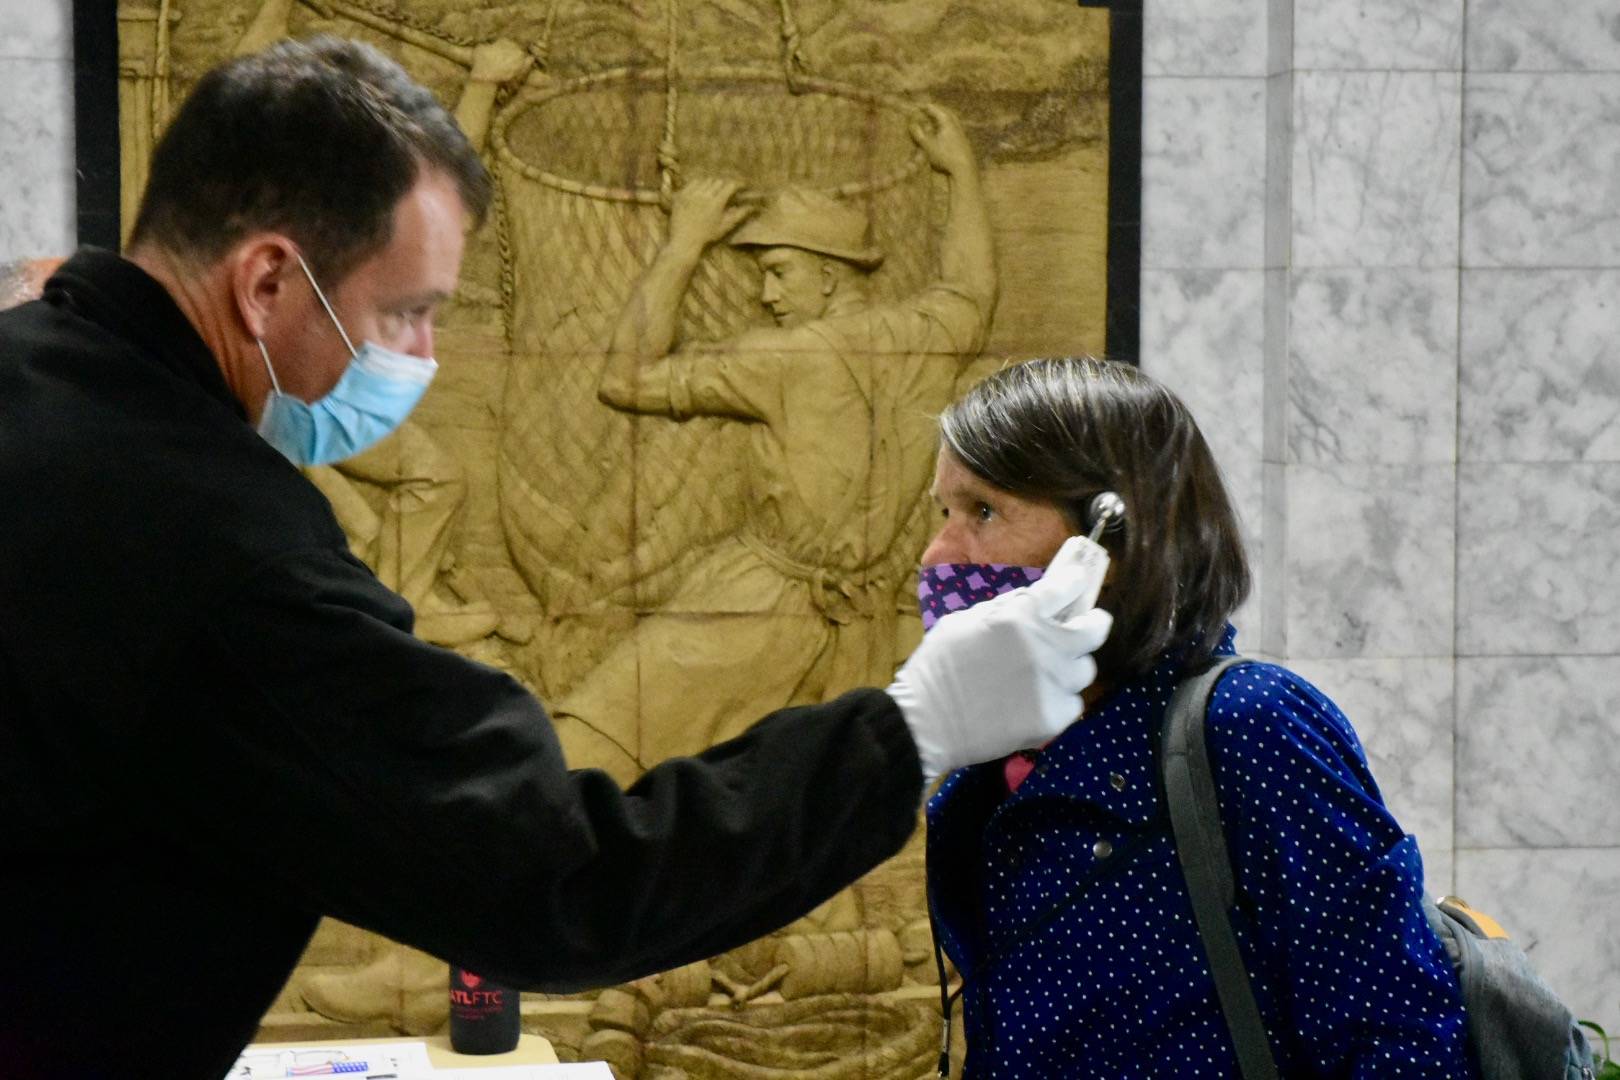 Rep. Jennifer Johnston, R-Anchorage, gets her temperature taken as she enters the Alaska State Capitol on Monday, May 18, 2020. New policies will require all staff and legislators to wear masks in chambers. (Peter Segall / Juneau Empire File)